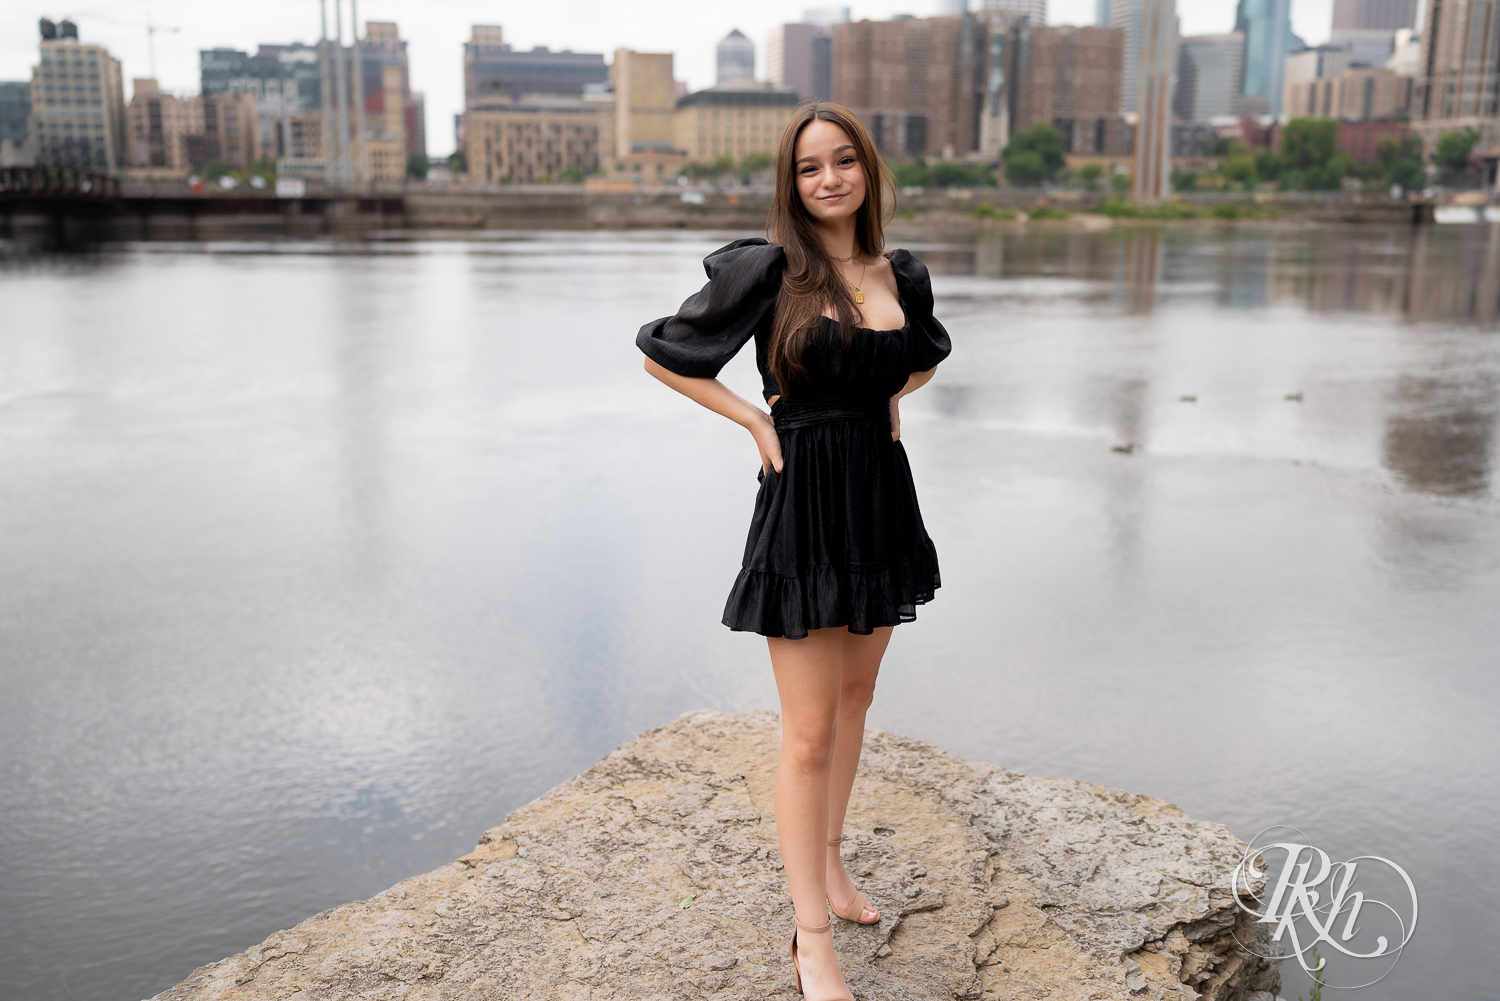 Lexi posing in a dress dress for senior photography in Minneapolis, Minnesota with the skyline in the background.